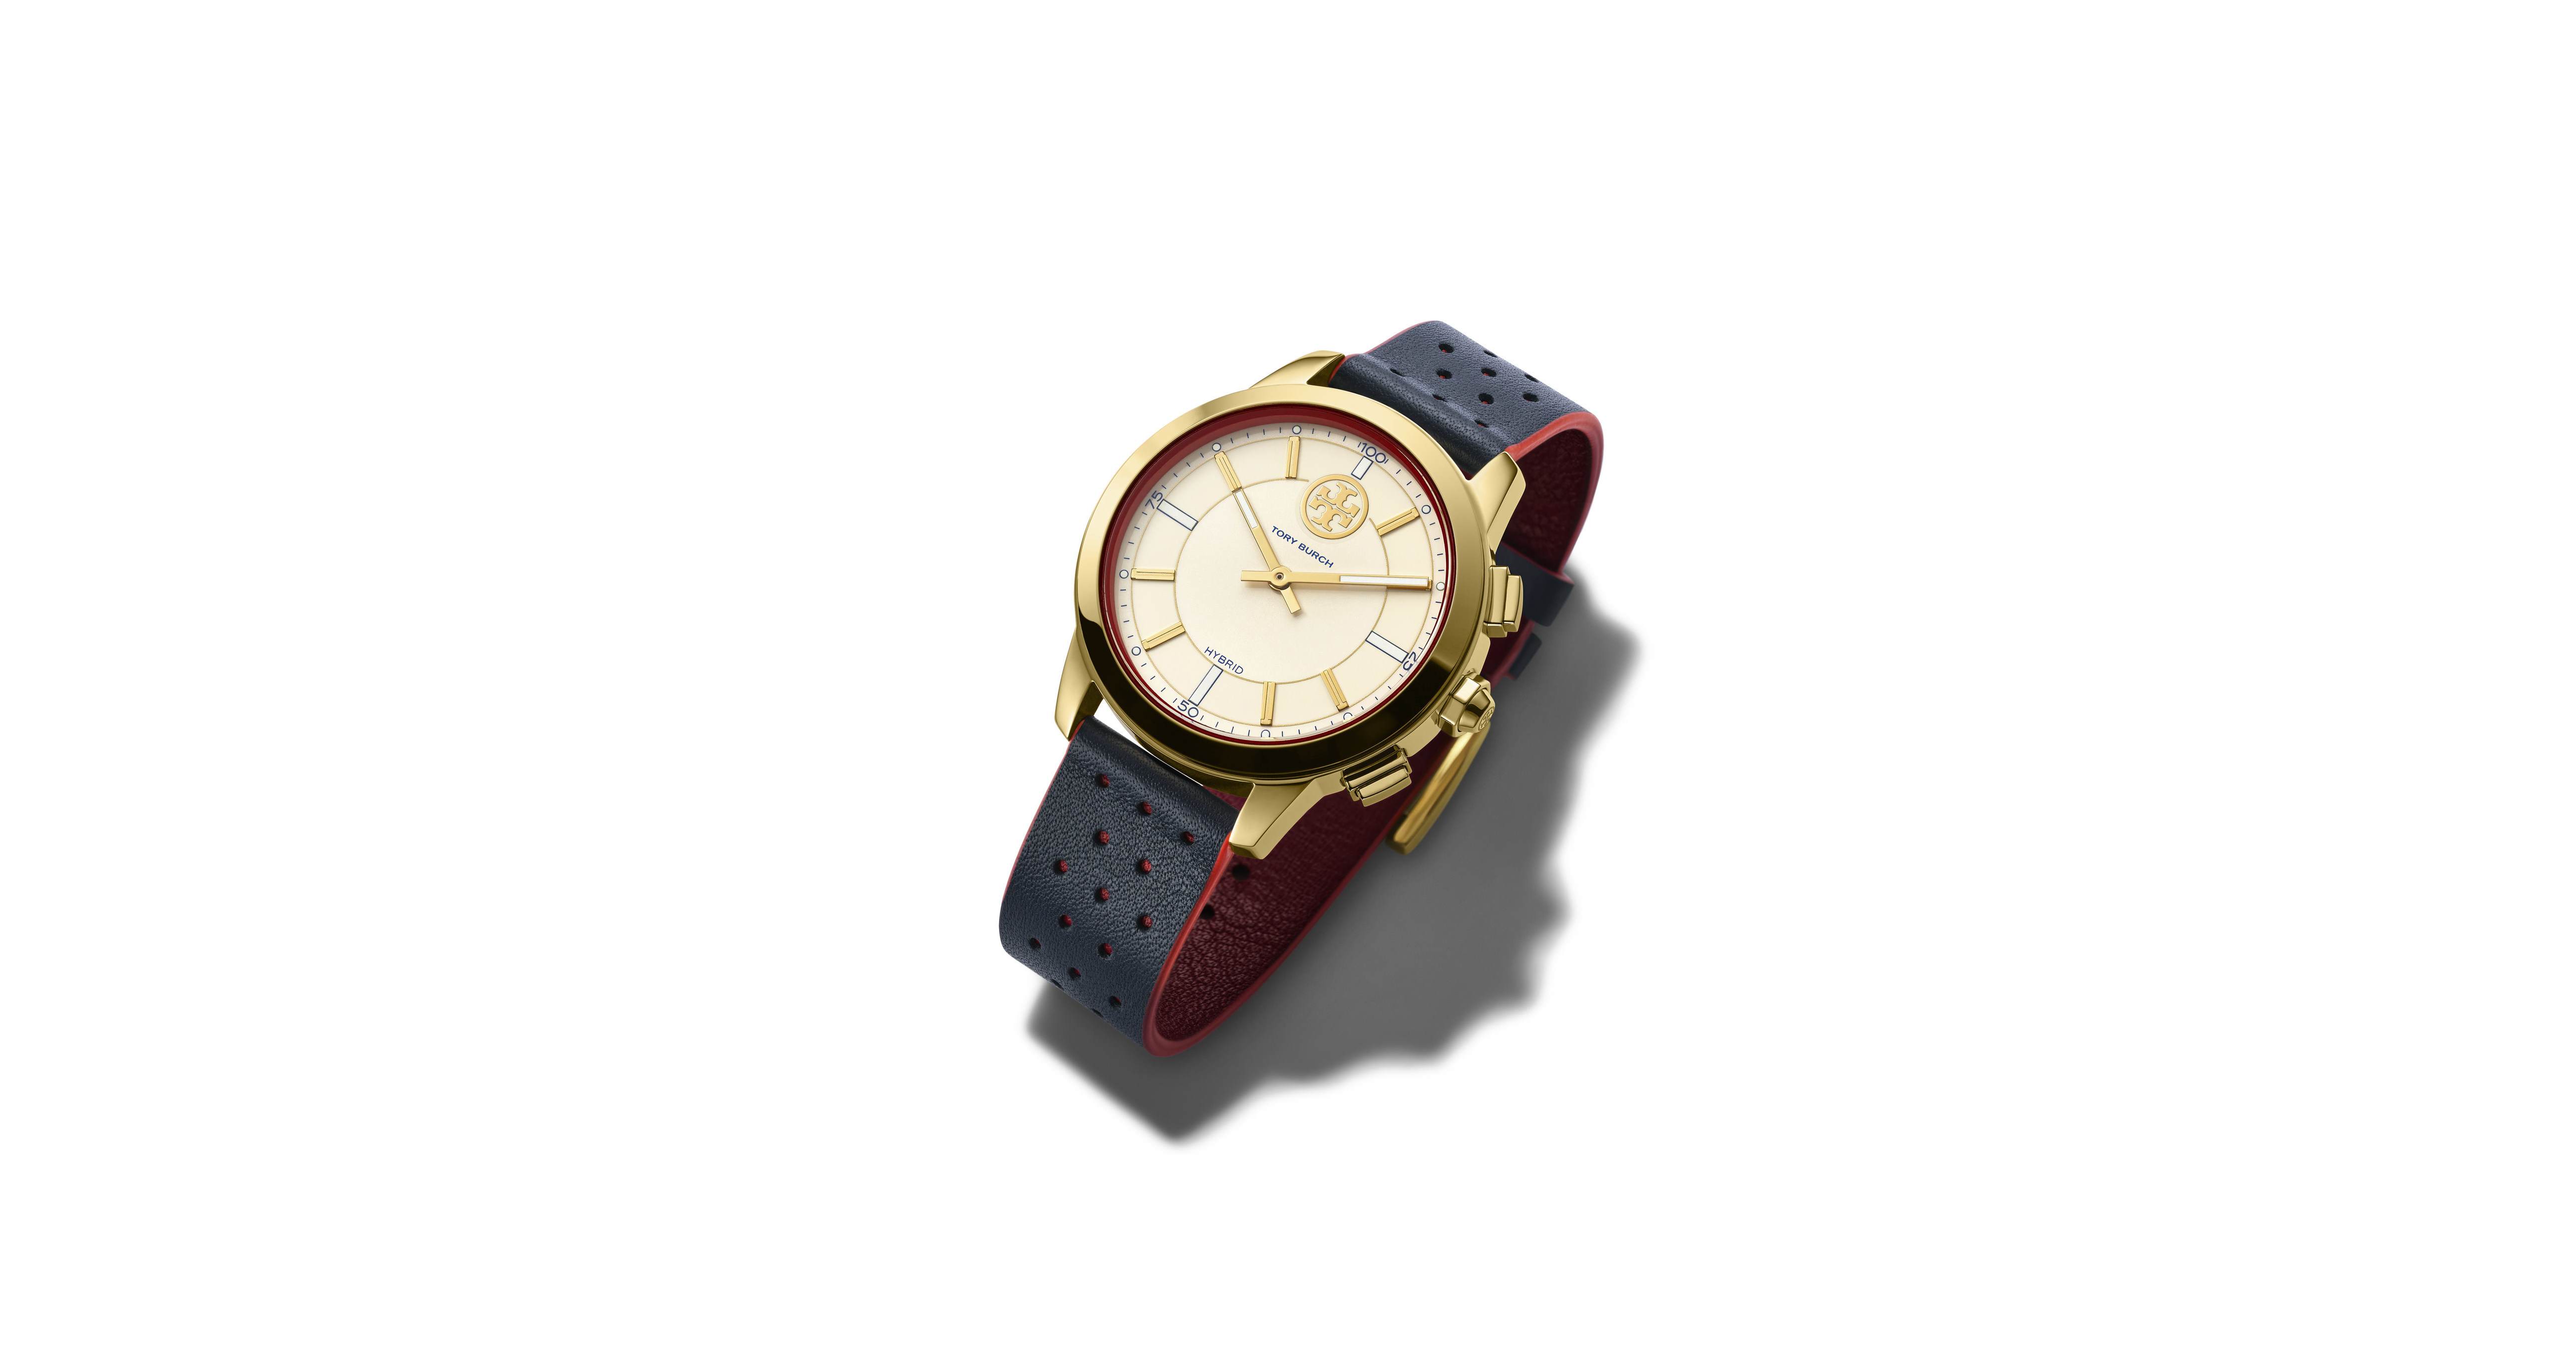 Bedstefar kamp hit Tory Burch Launches First Hybrid Smartwatch For Holiday 2017